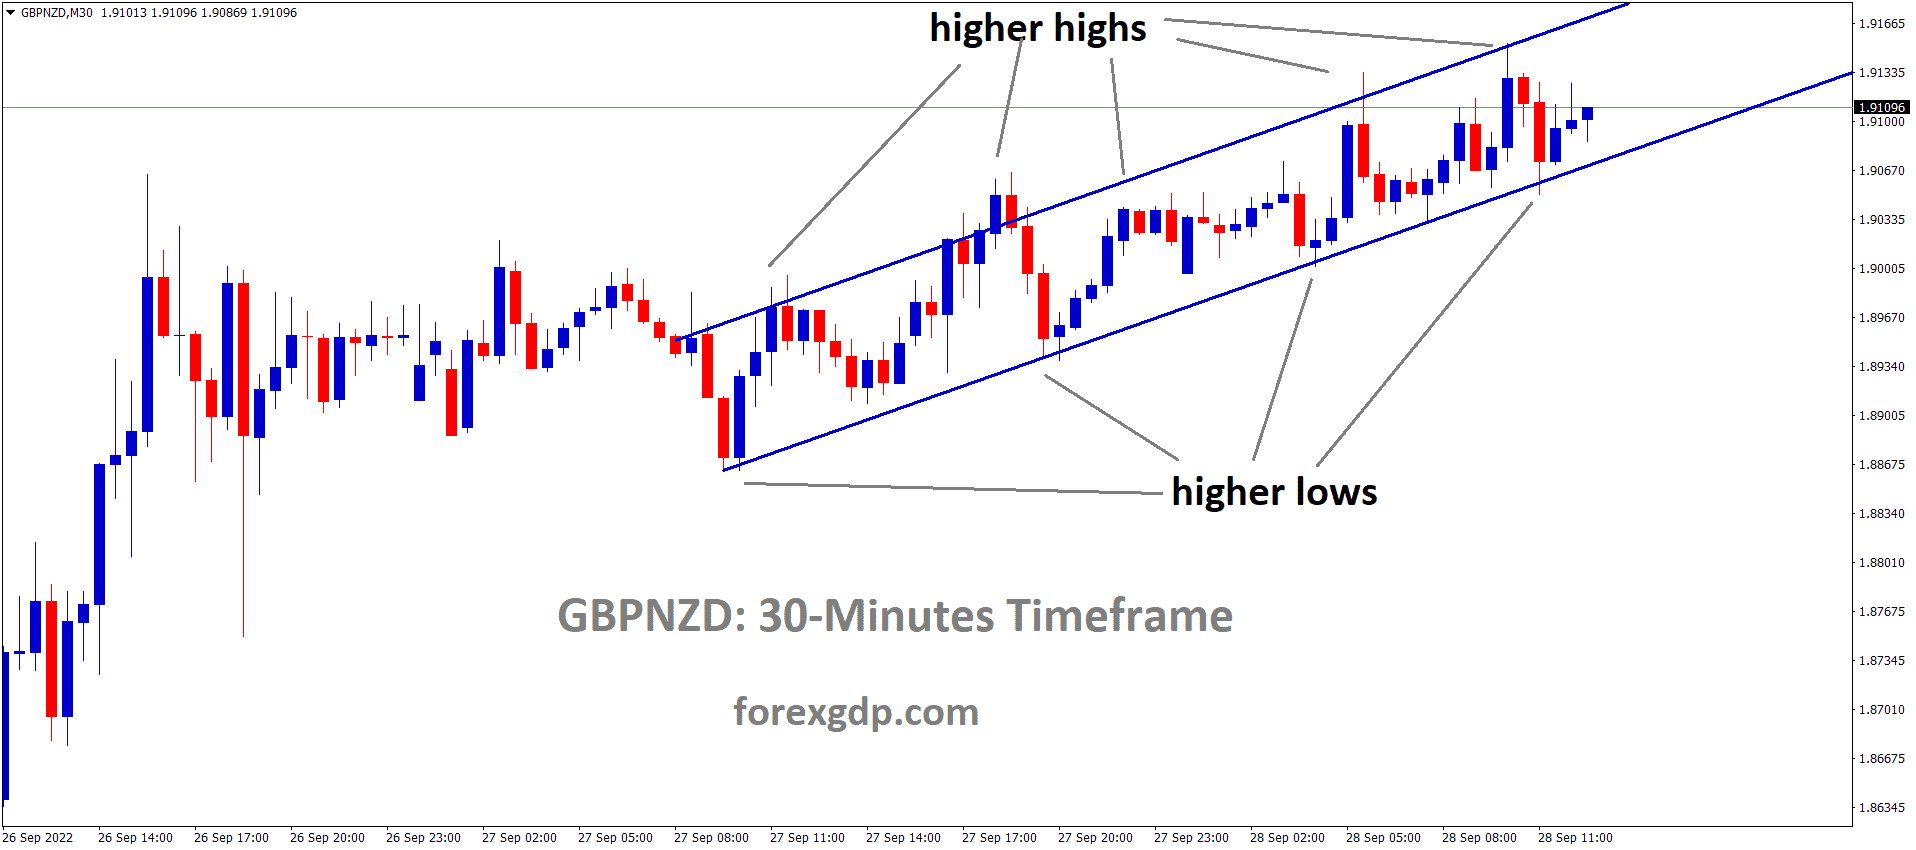 GBPNZD is moving in an Ascending channel and the market has rebounded from the higher low area of the channel.